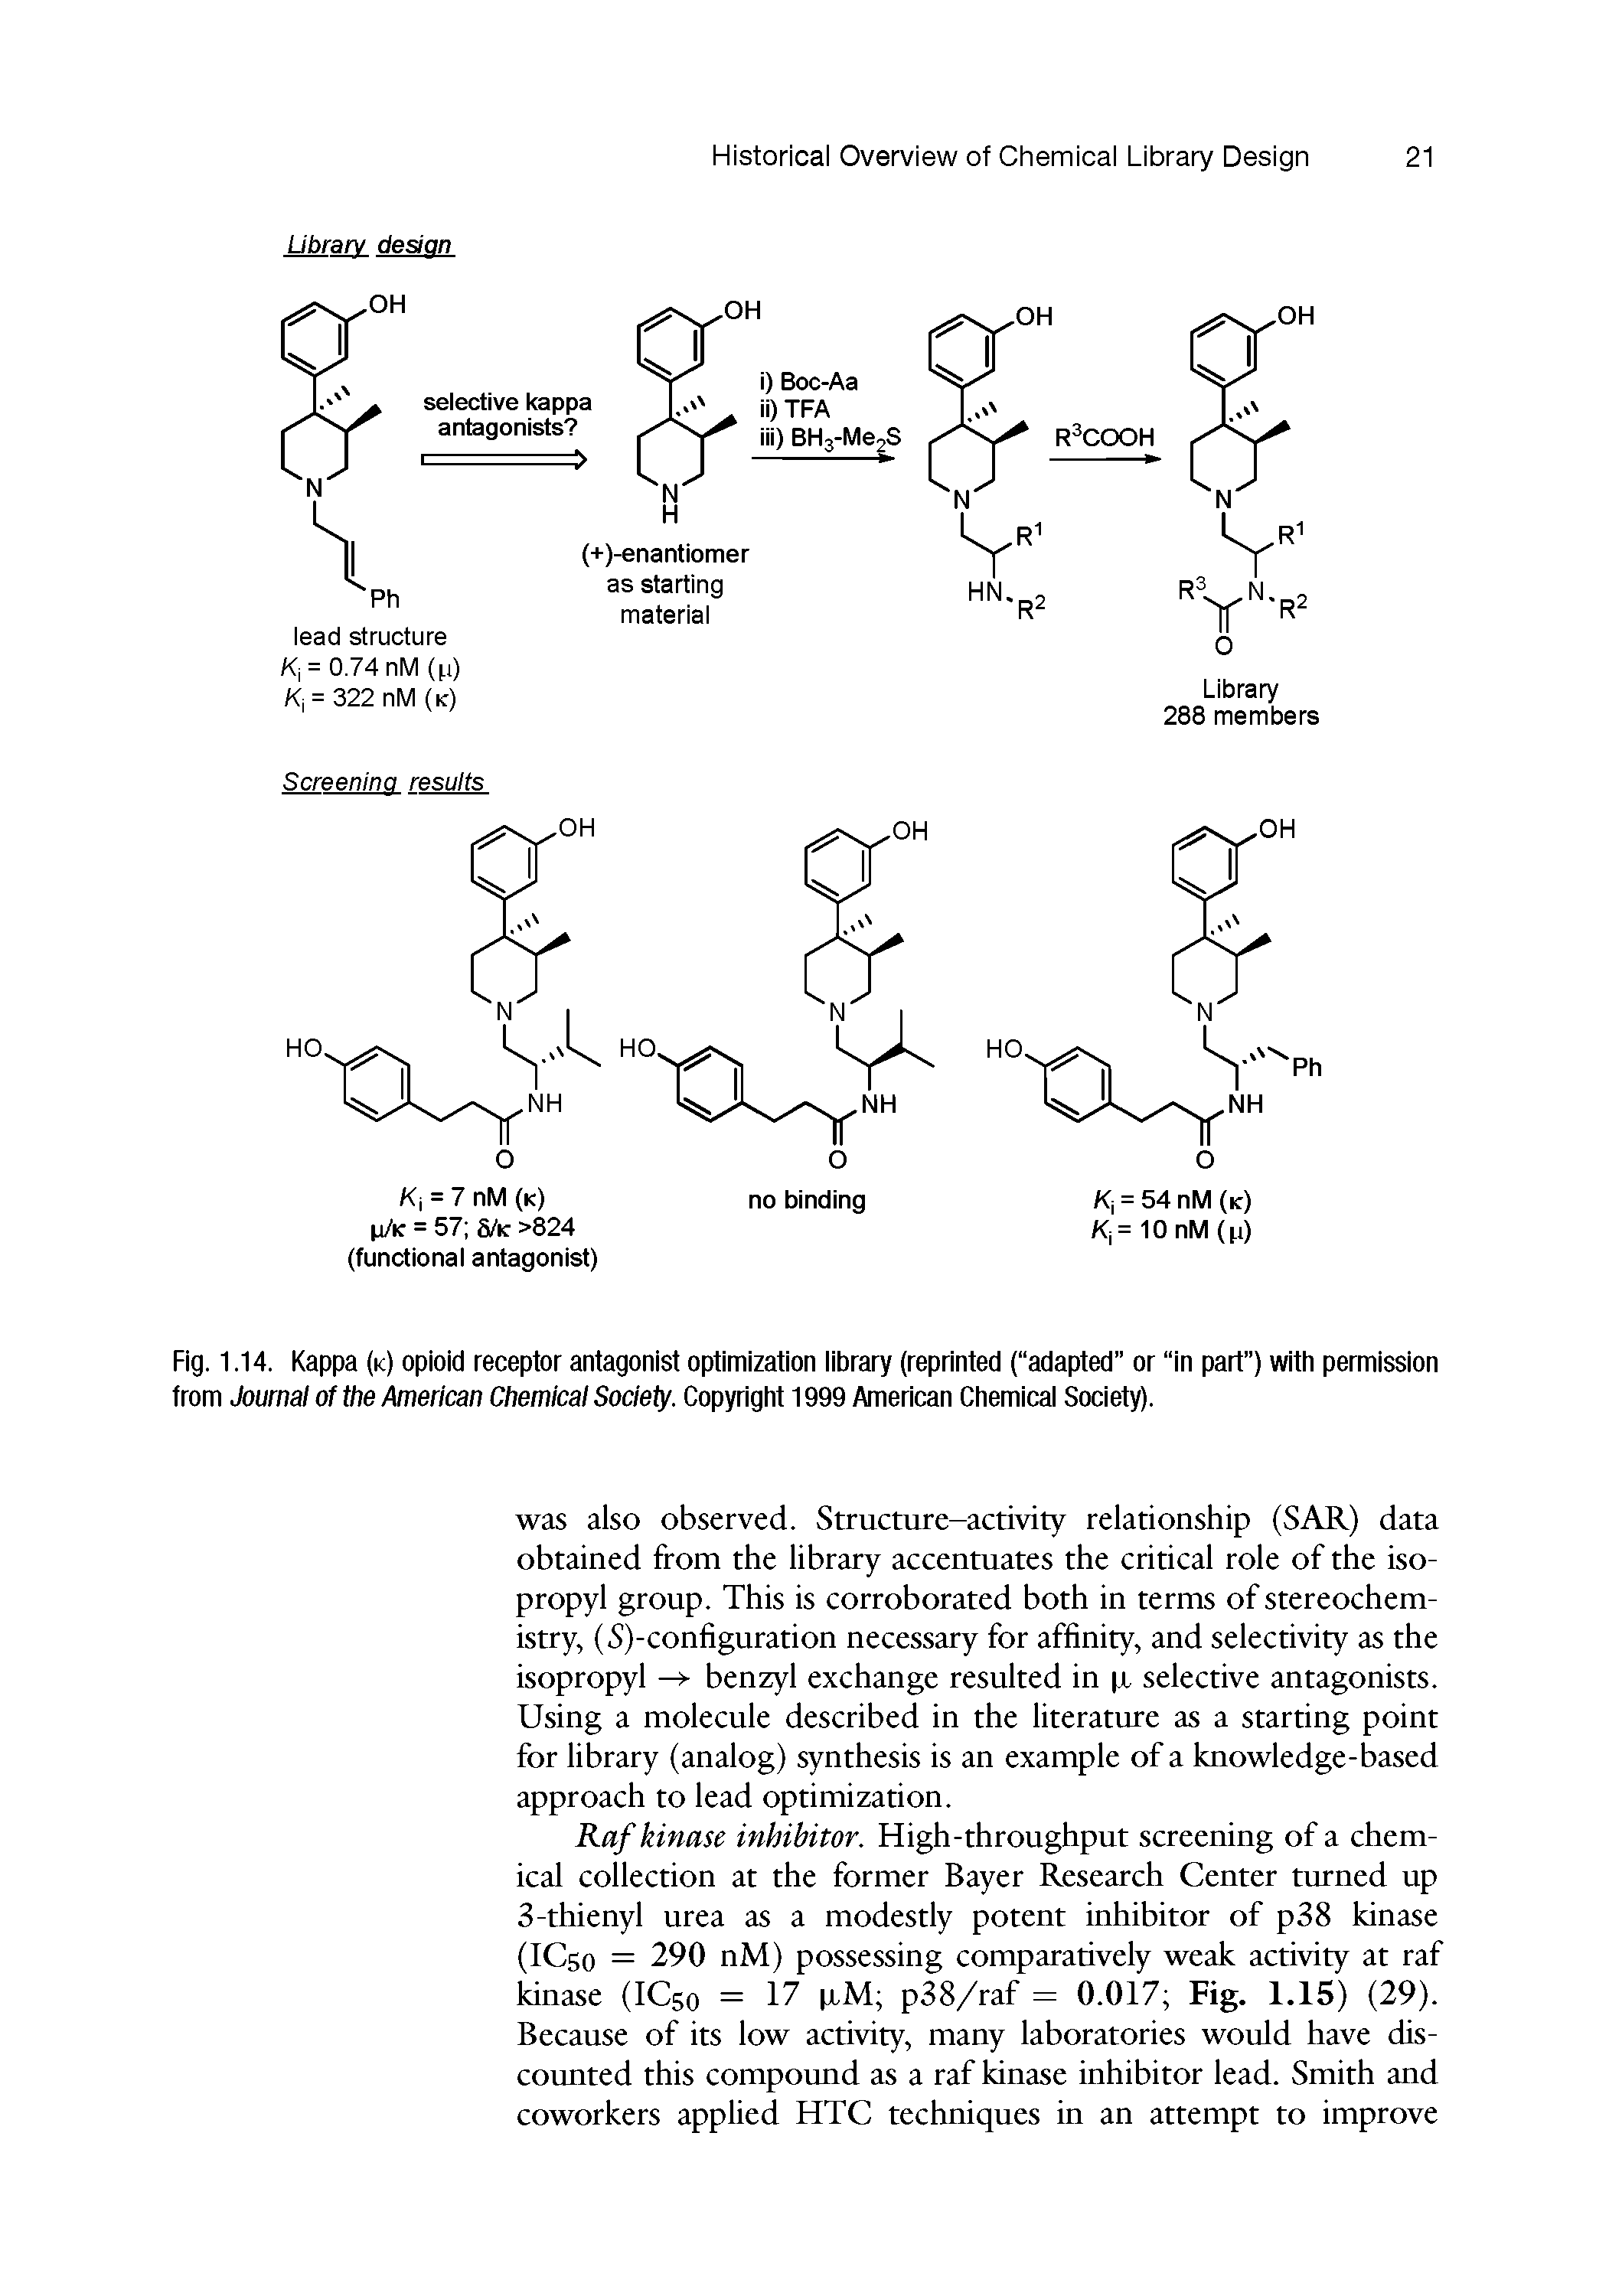 Fig. 1.14. Kappa ( ) opioid receptor antagonist optimization library (reprinted ( adapted or in part ) with permission from Journal of the American Chemical Society. Copyright 1999 American Chemical Society).